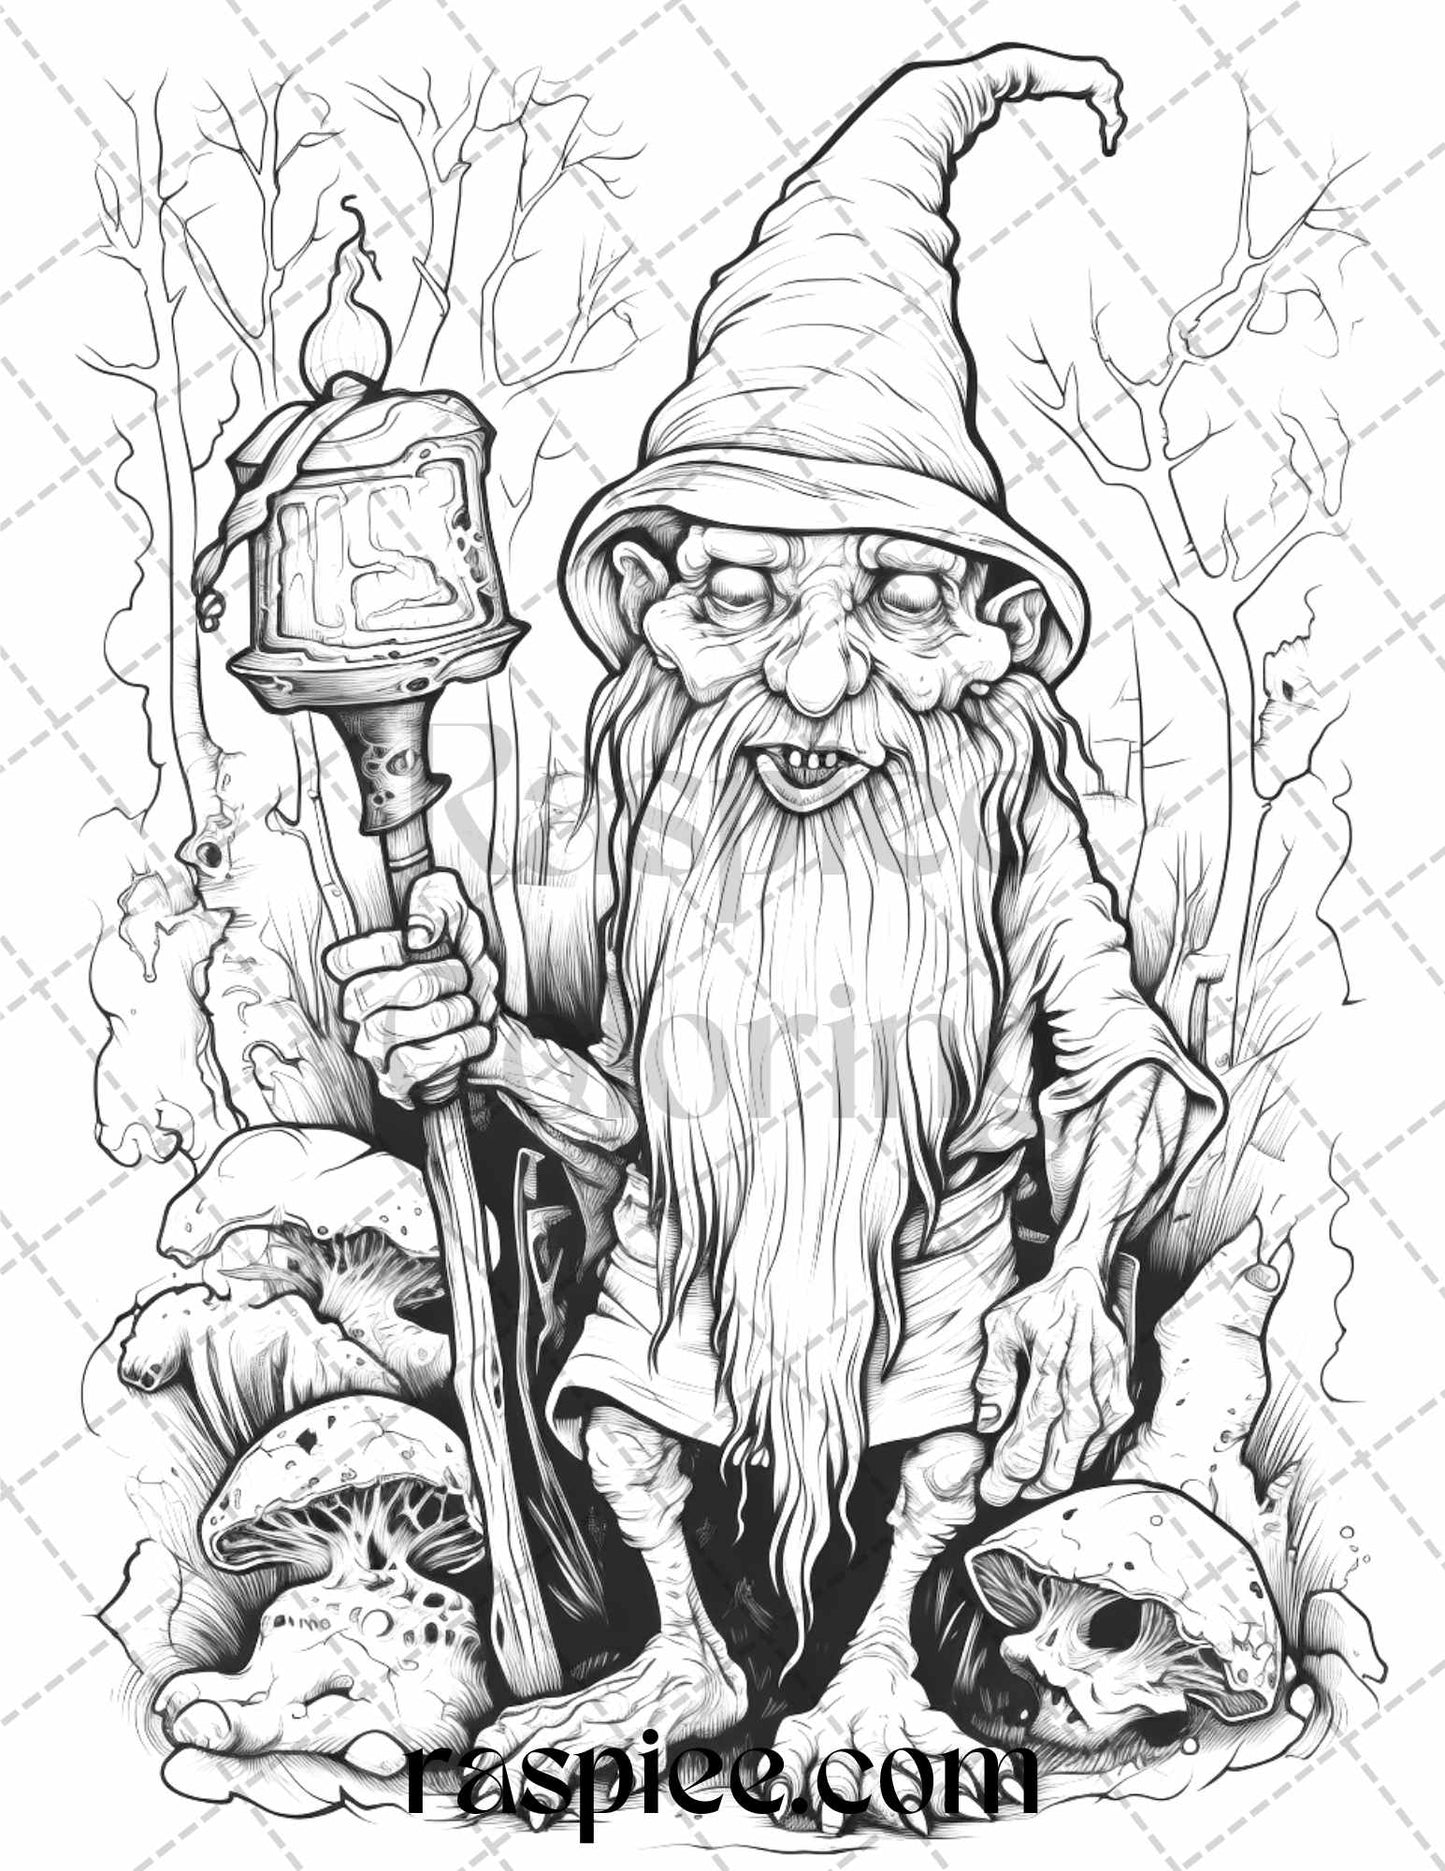 50 Horror Zombie Gnomes Grayscale Coloring Pages Printable for Adults, PDF File Instant Download - raspiee